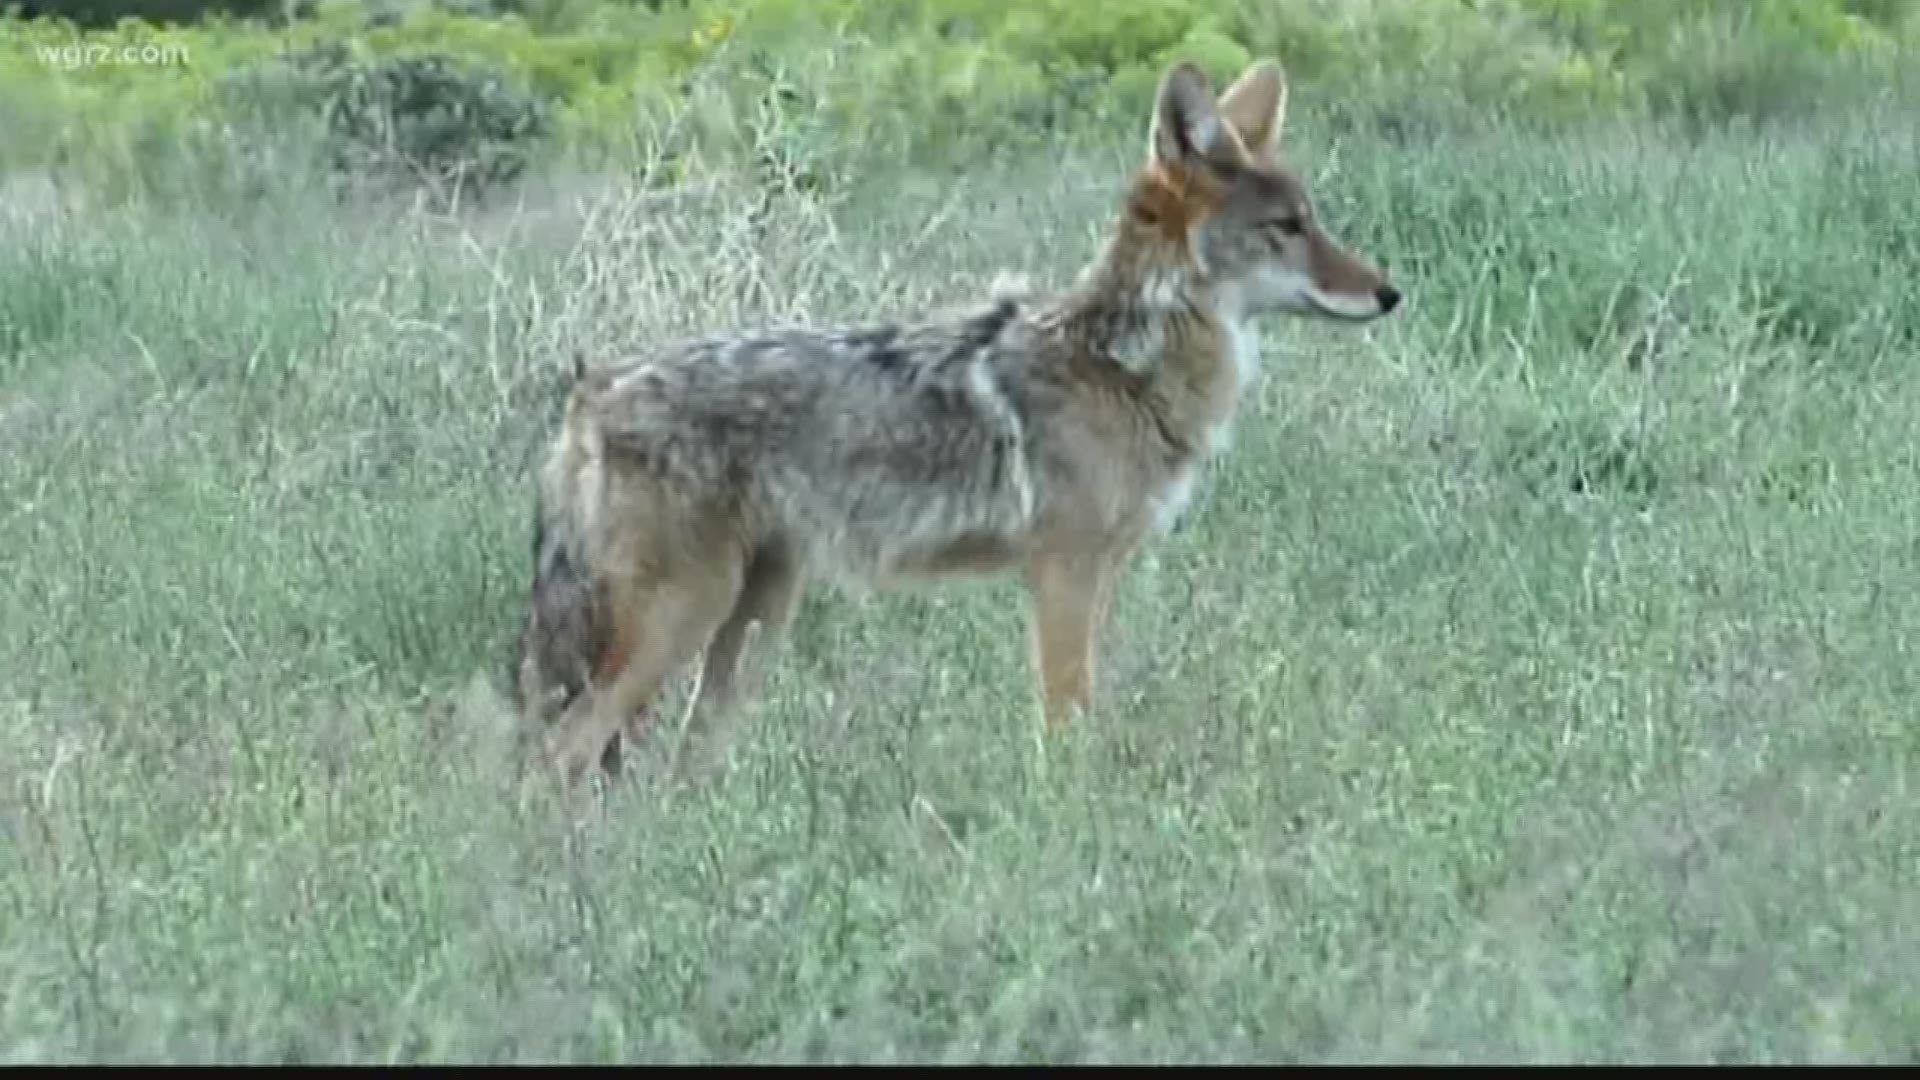 slave Uden tvivl Gøre klart Conflicts with coyotes can be prevented across Western New York | wgrz.com